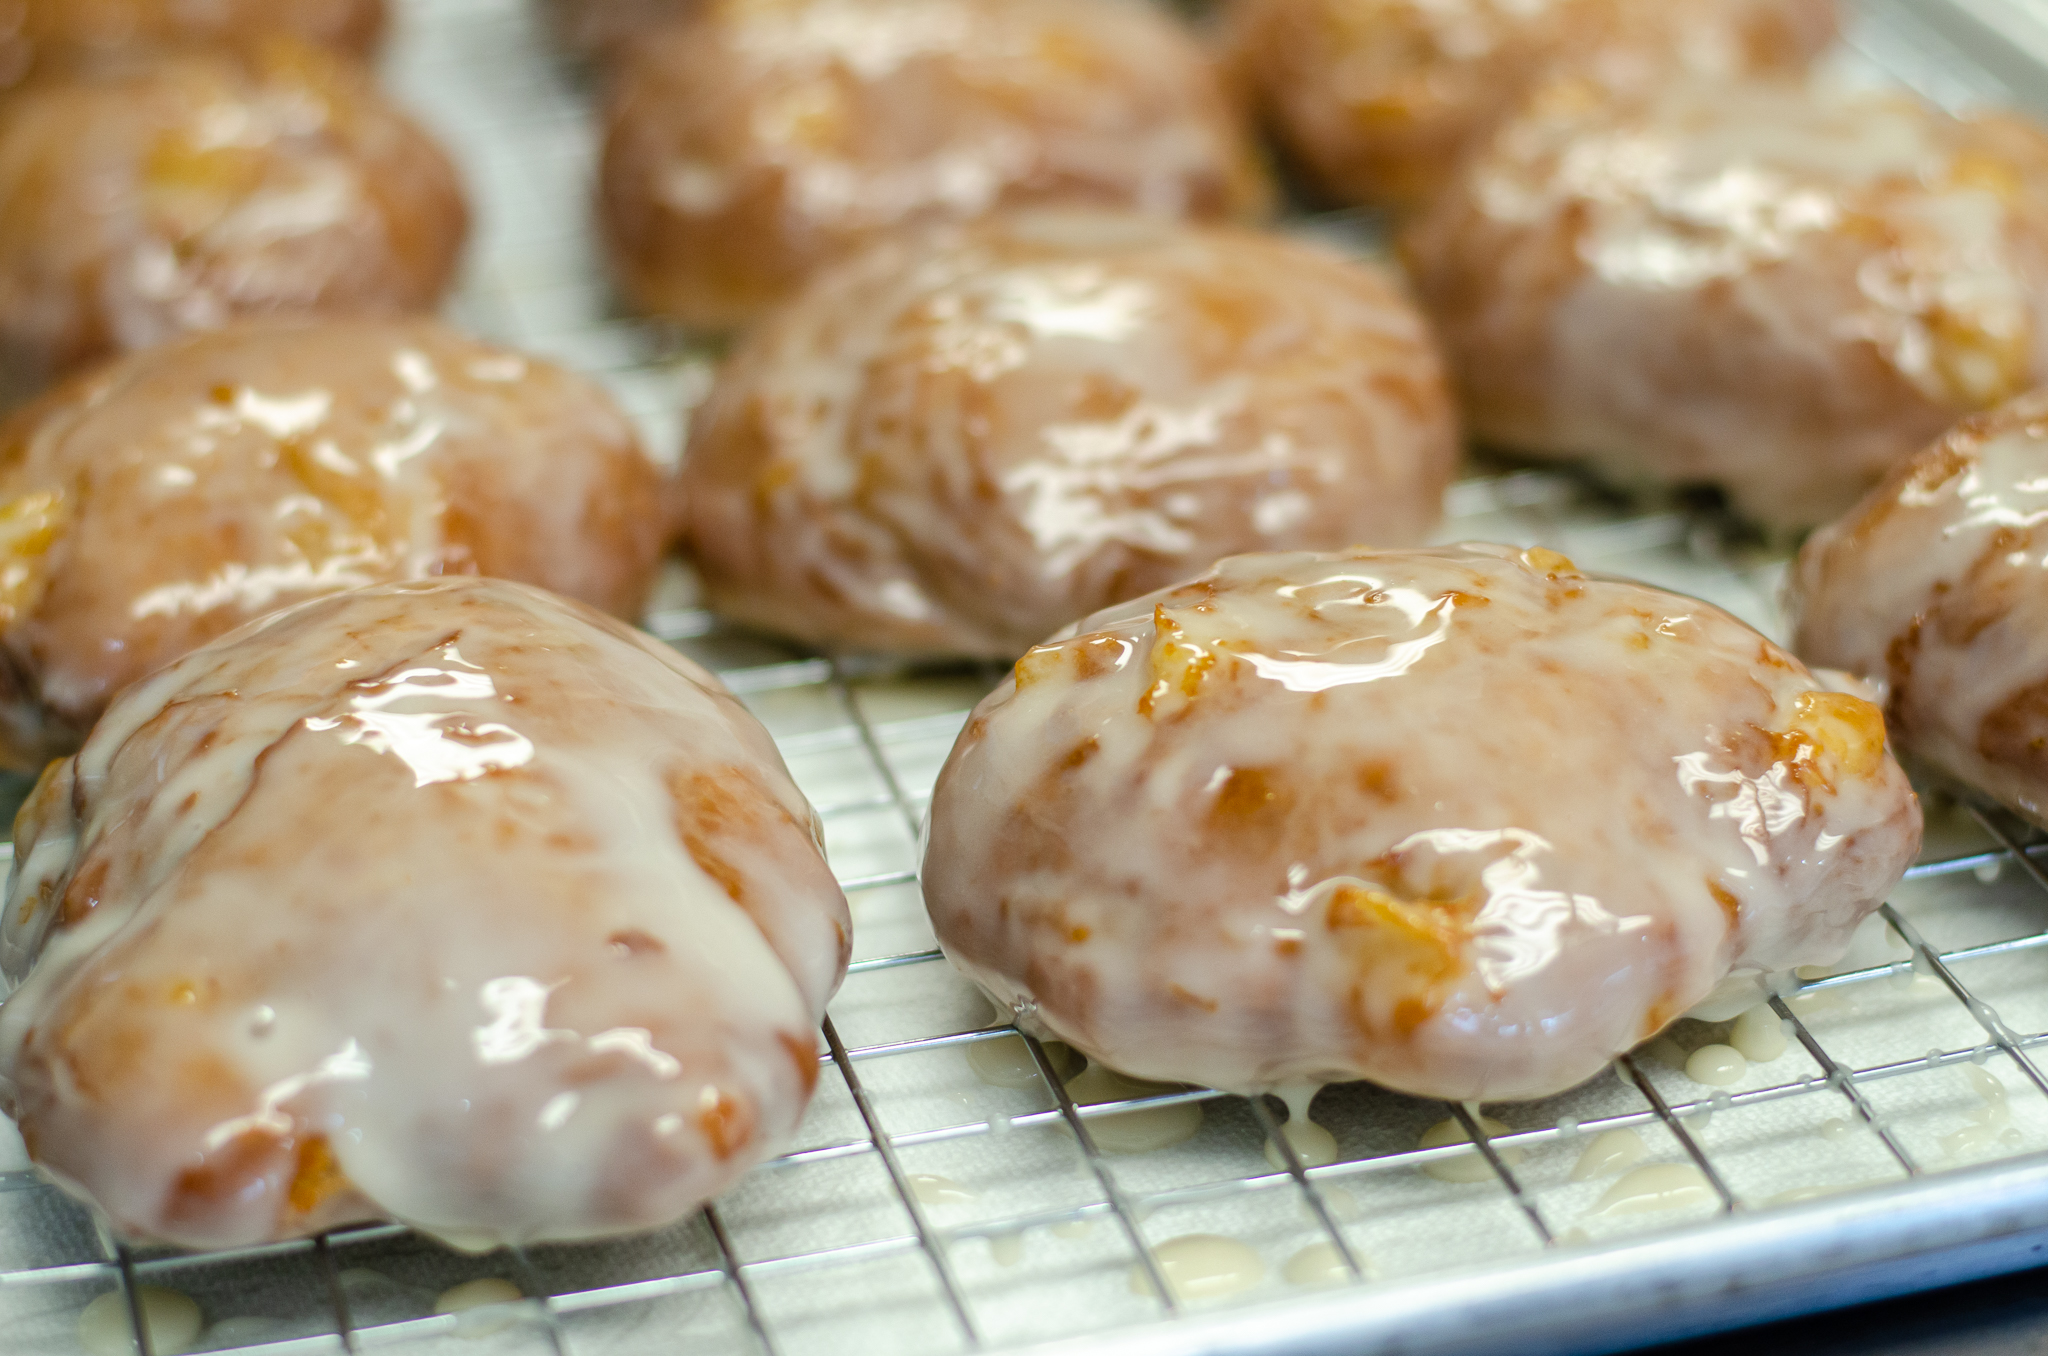 Apple fritters from Plant Joy in Windsor, Ontario.